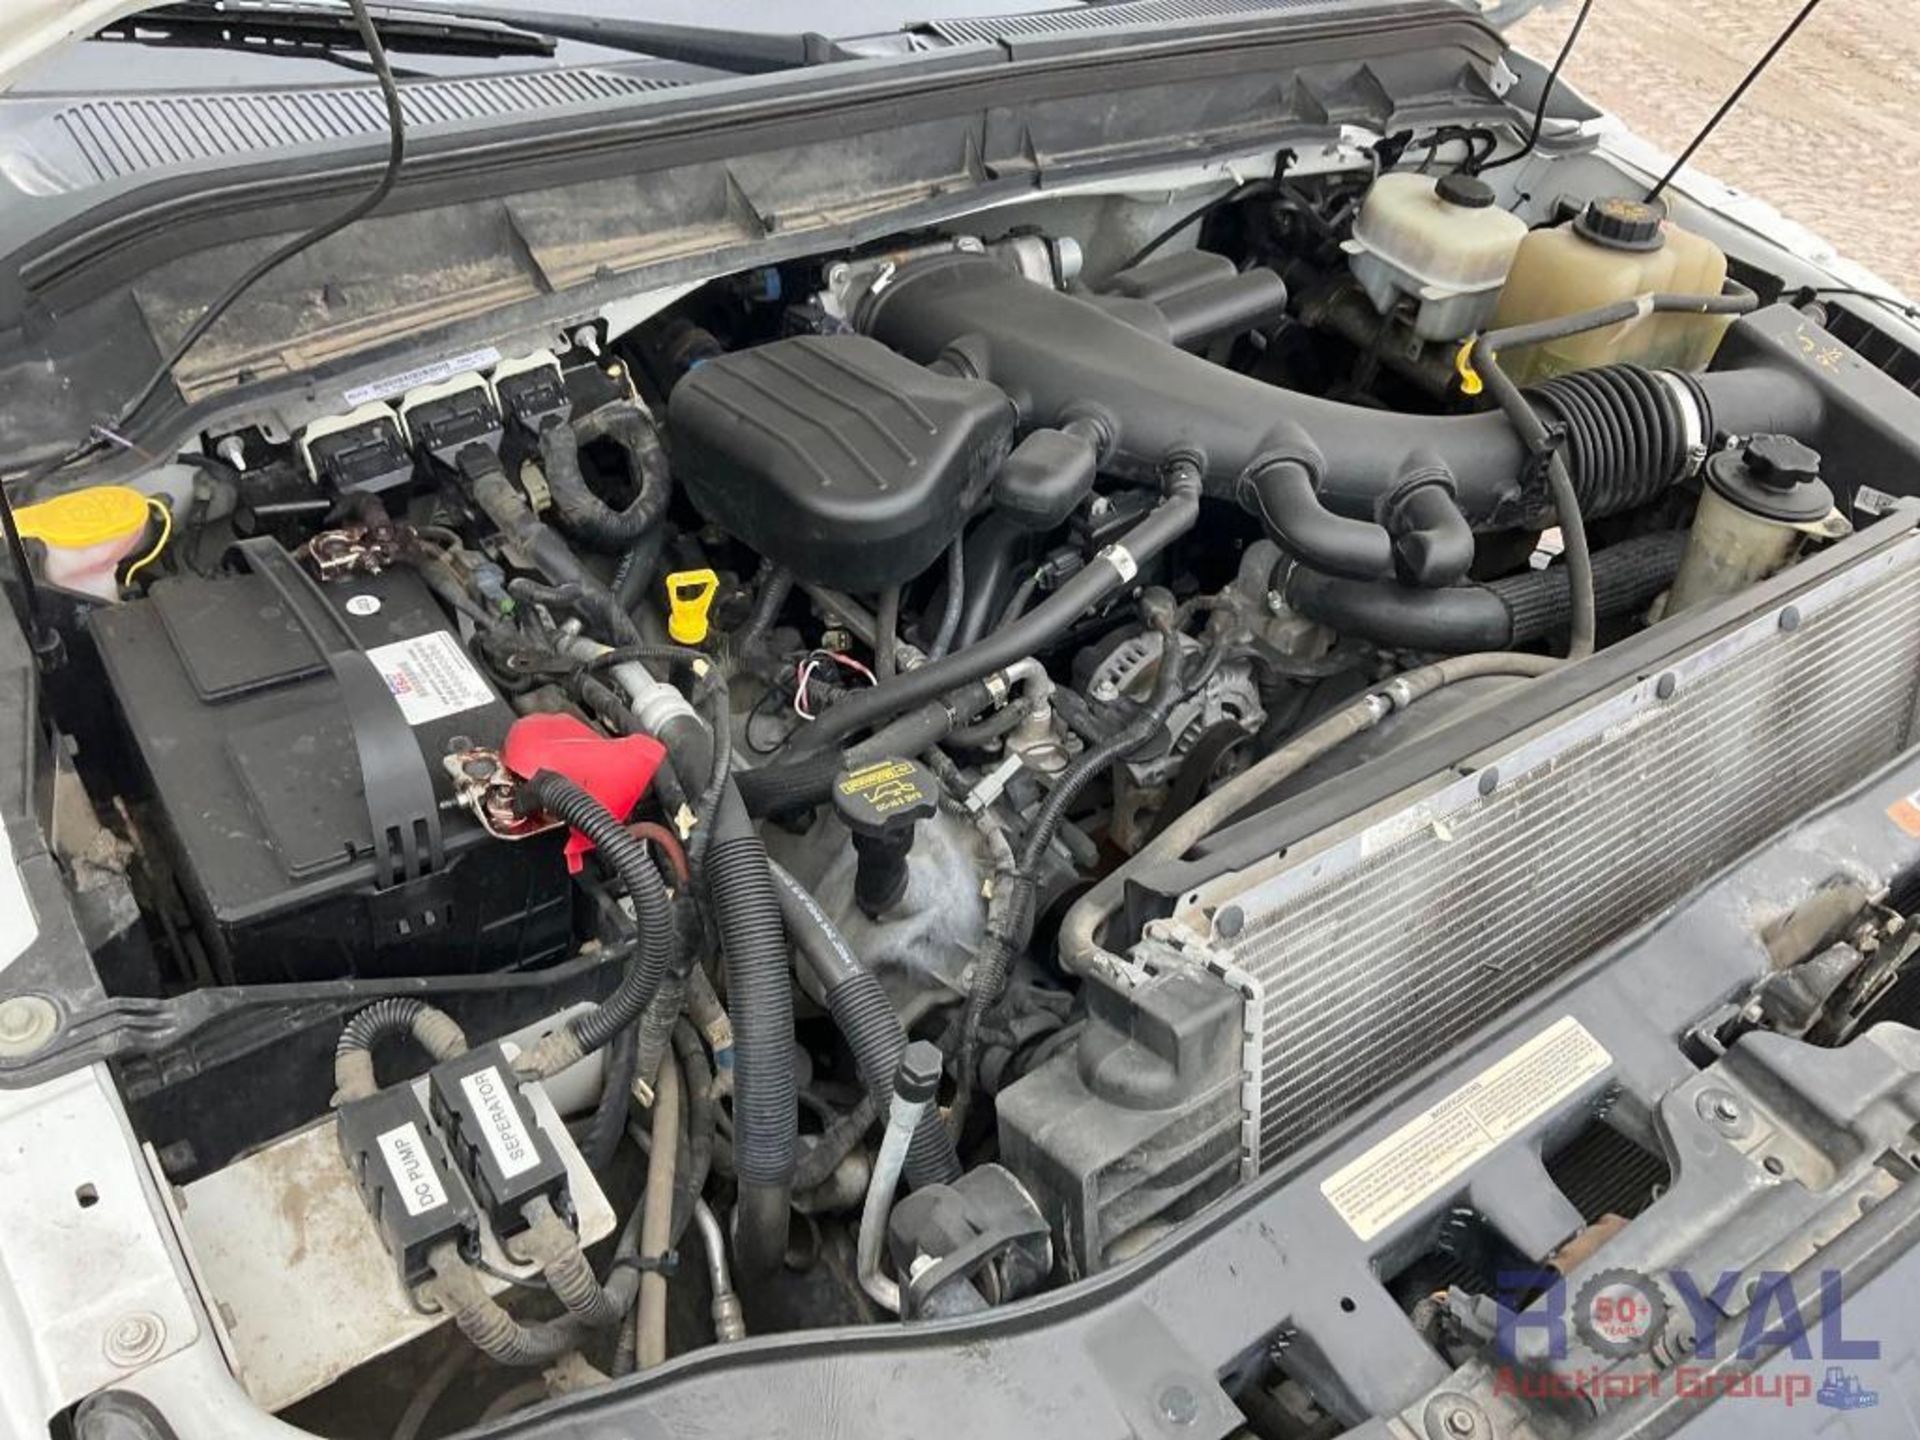 2012 Ford F450 Service Truck - Image 9 of 27